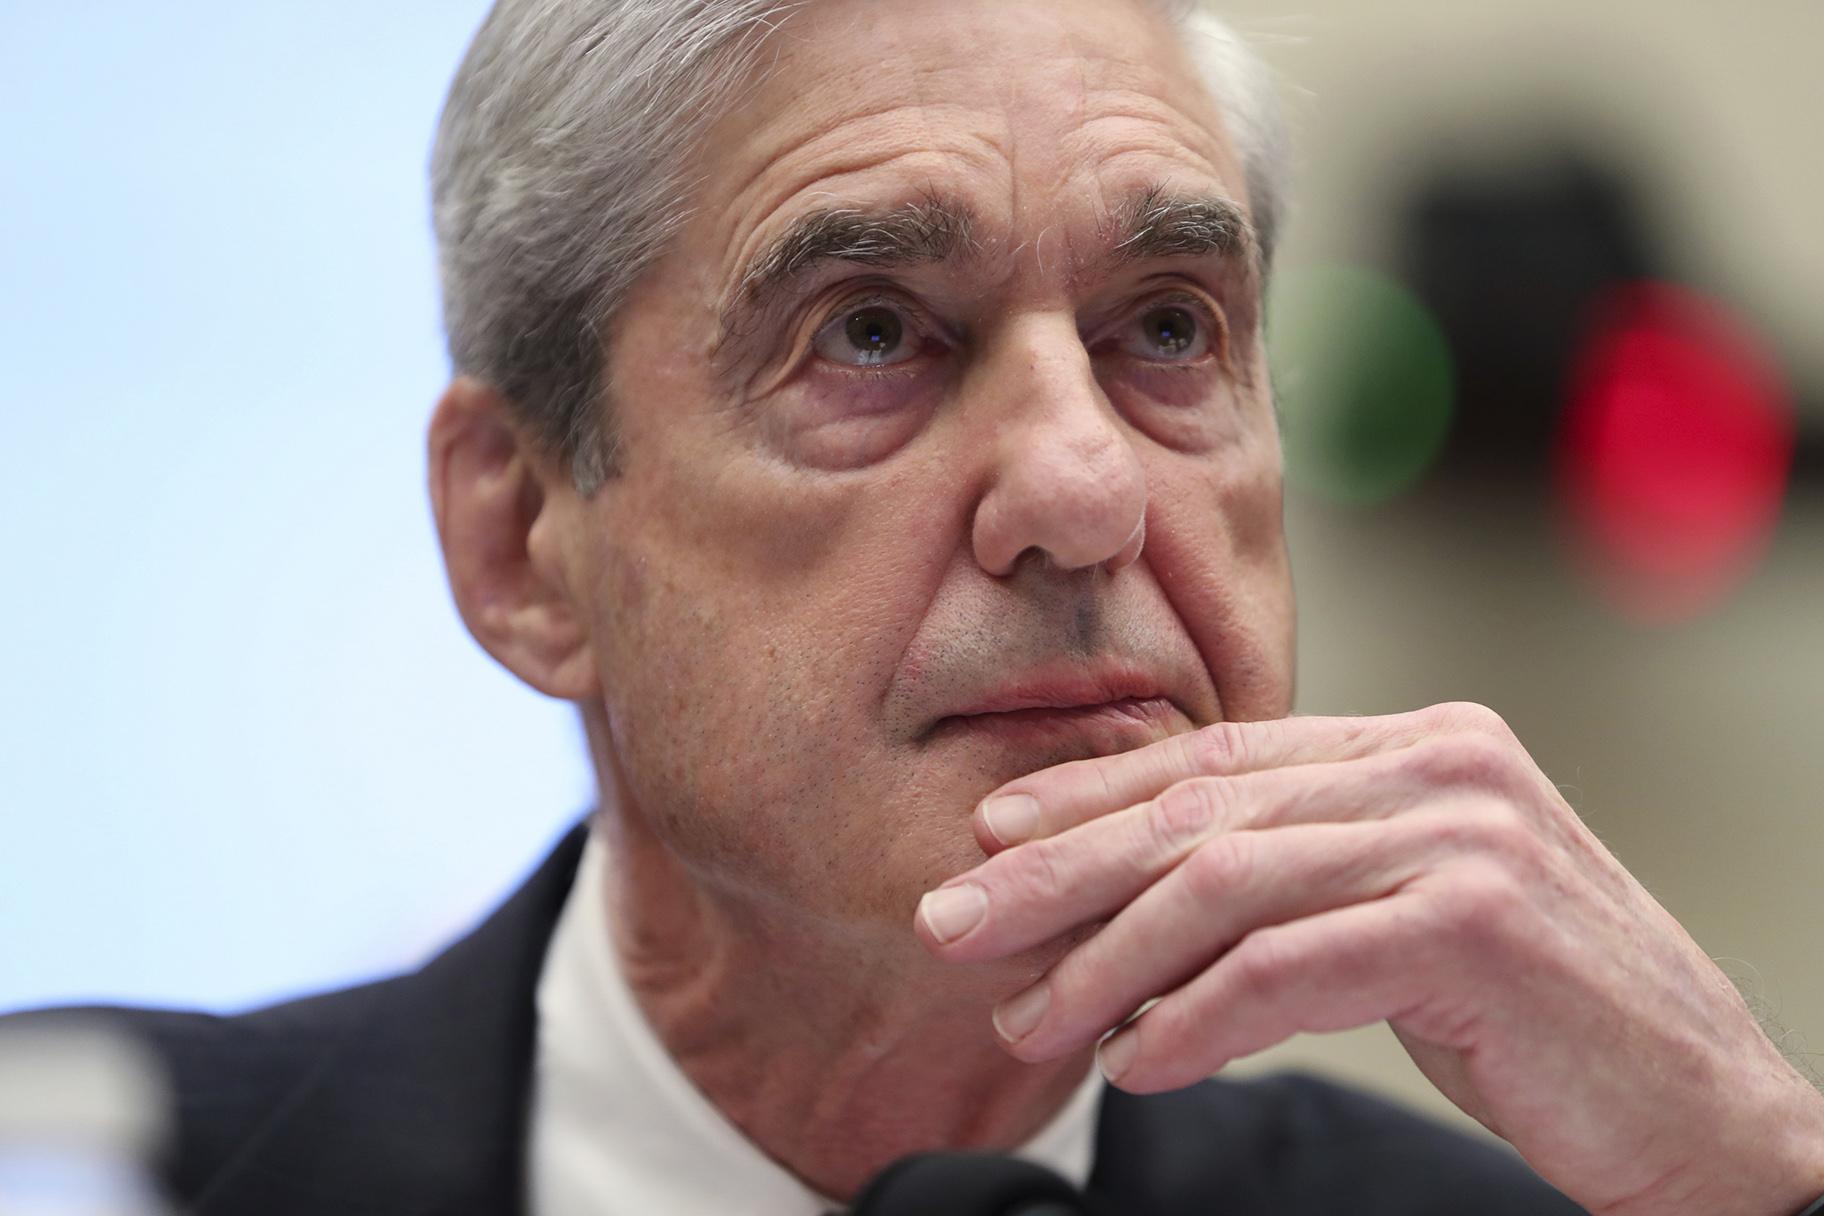 Former special counsel Robert Mueller testifies before the House Judiciary Committee in  Washington, D.C. on Wednesday, July 24, 2019. (AP Photo / Andrew Harnik)